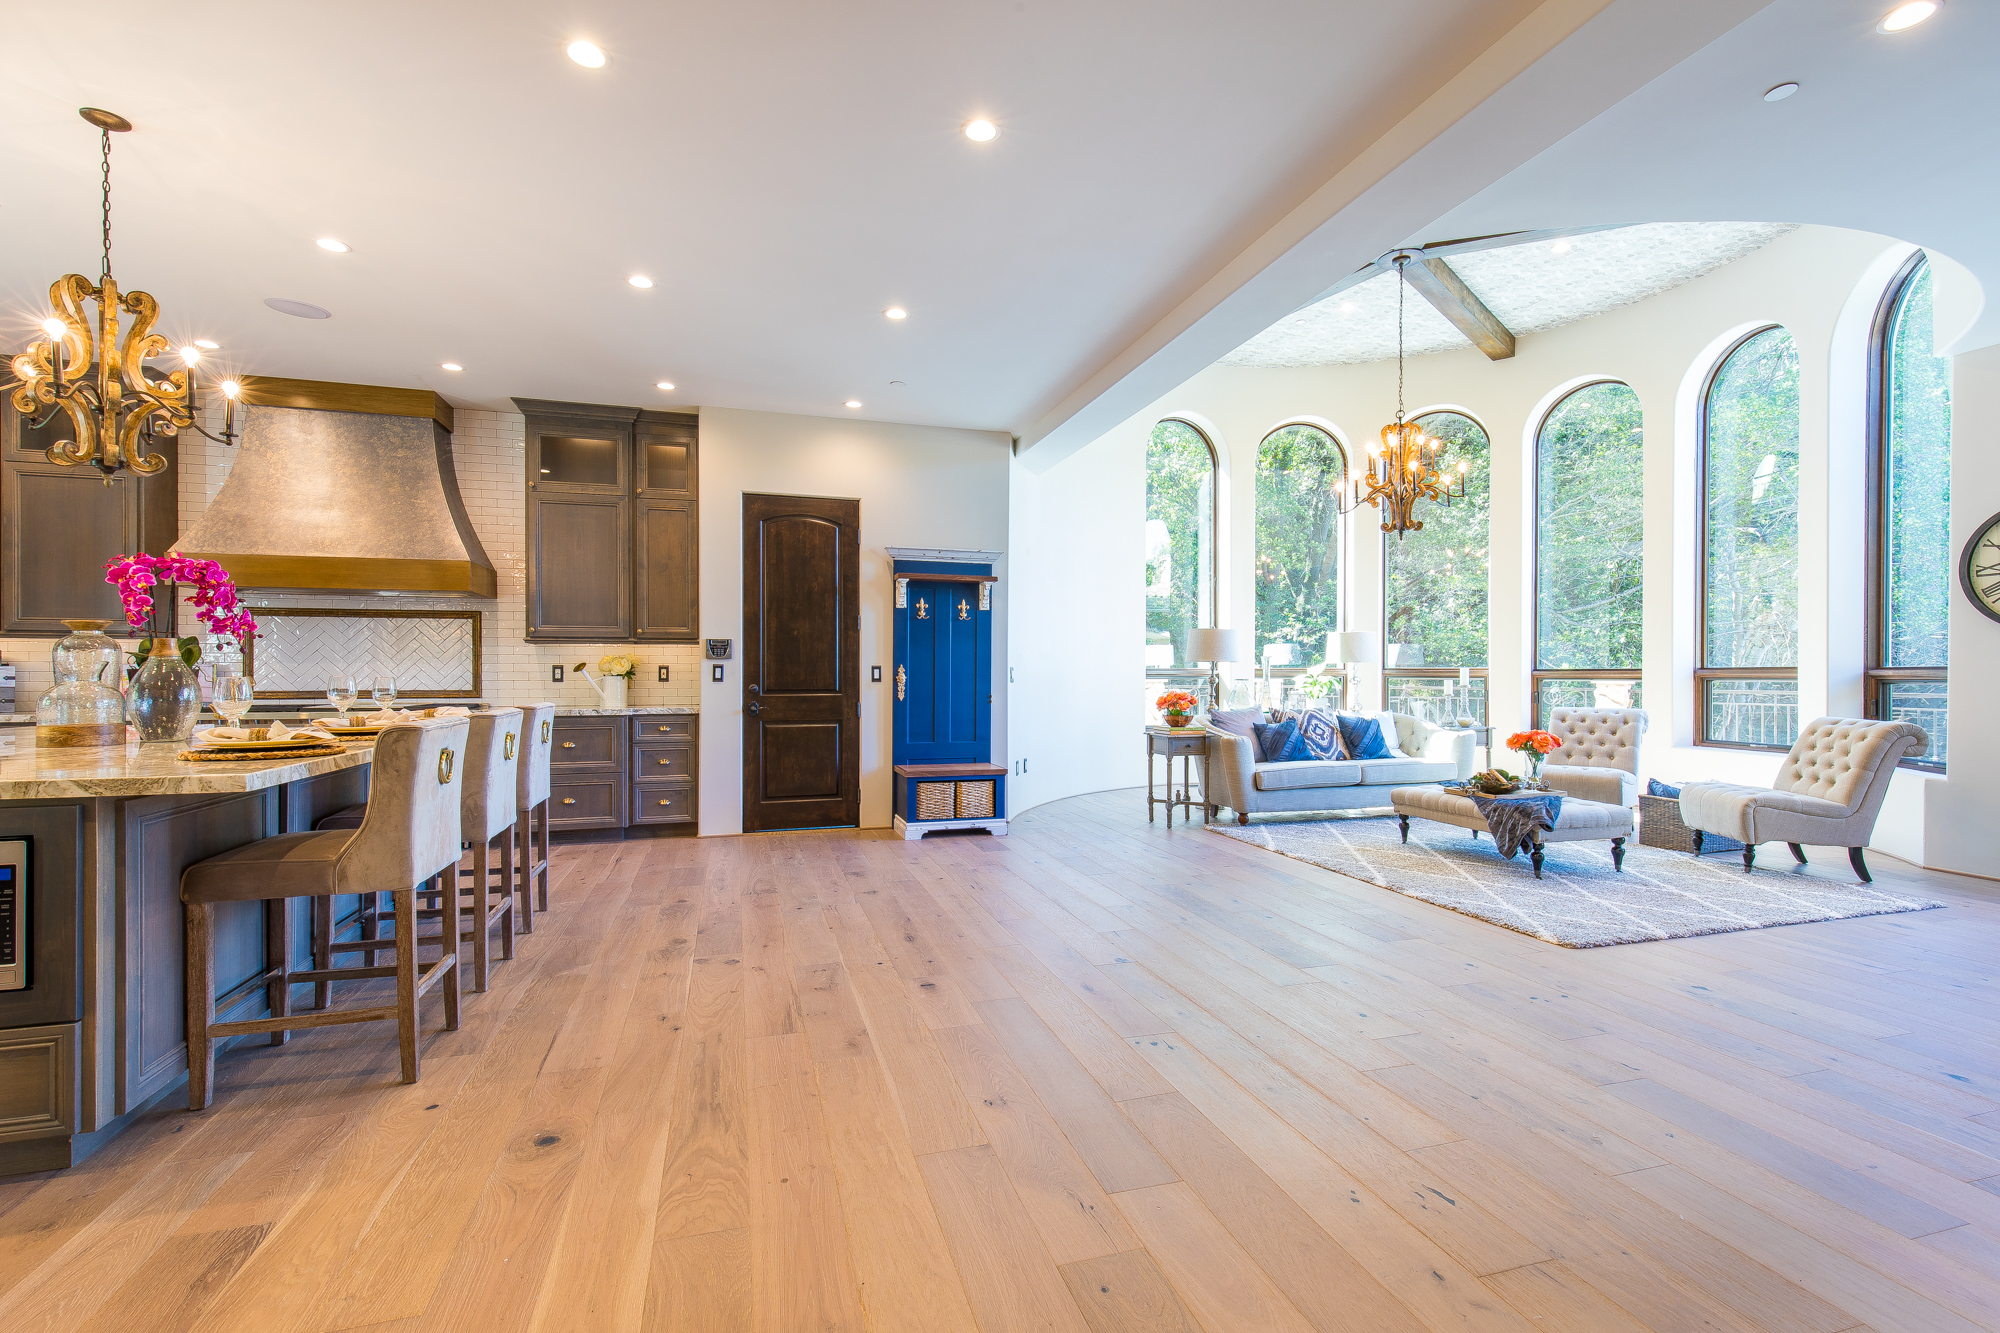  European white oak hardwood floors provide the foundation for the custom made floor to ceiling hand-stained cabinetry that flank the wood burning fireplace, topped with a hand-stained wood mantle 